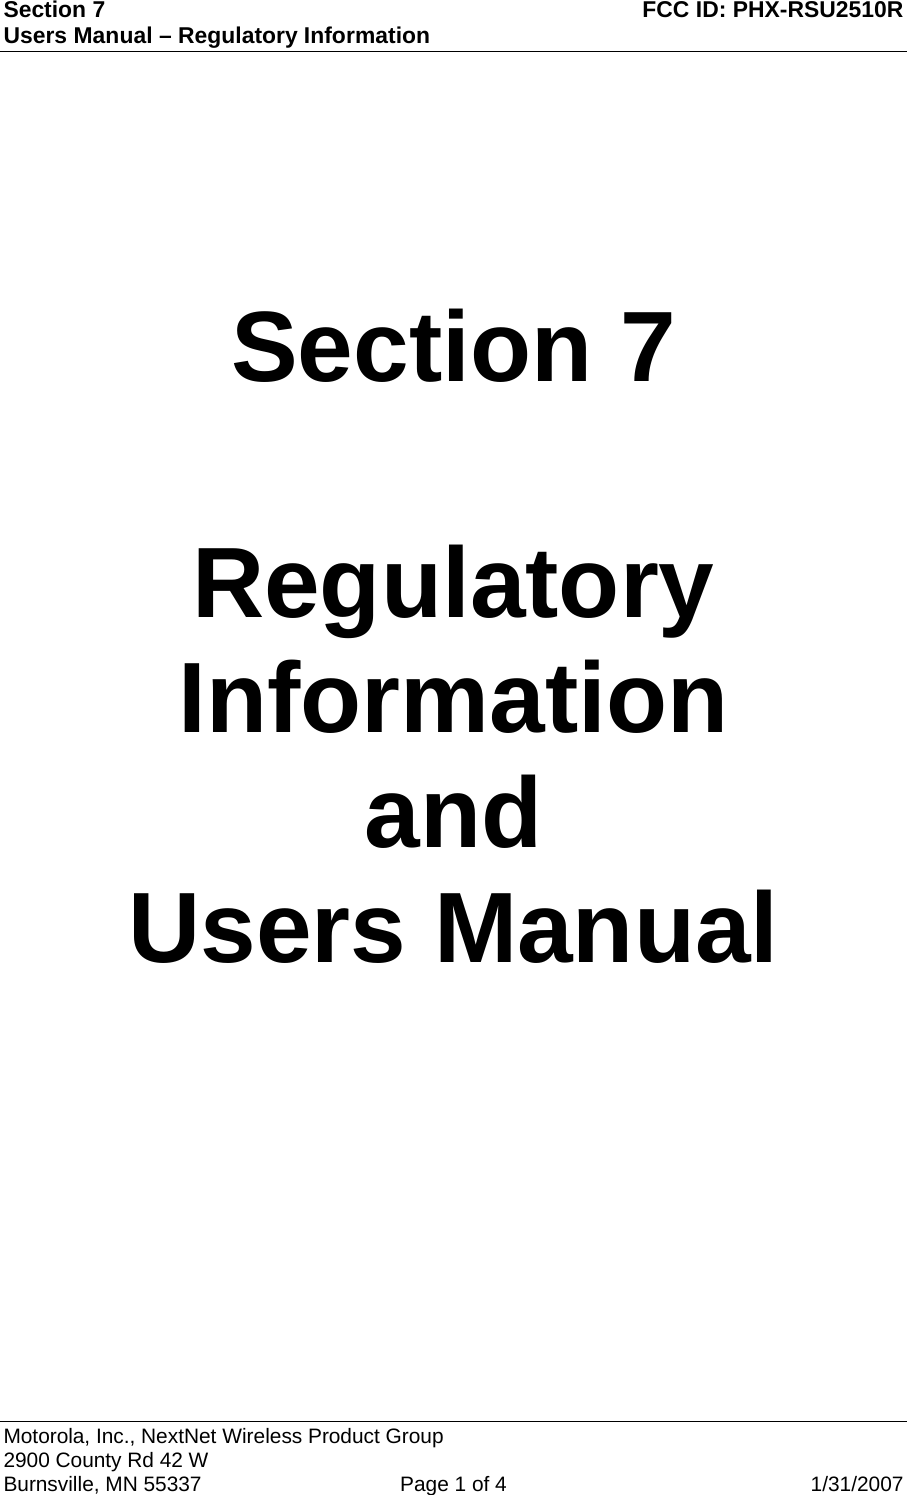 Section 7  FCC ID: PHX-RSU2510R Users Manual – Regulatory Information Motorola, Inc., NextNet Wireless Product Group  2900 County Rd 42 W Burnsville, MN 55337   Page 1 of 4  1/31/2007     Section 7  Regulatory Information and Users Manual  